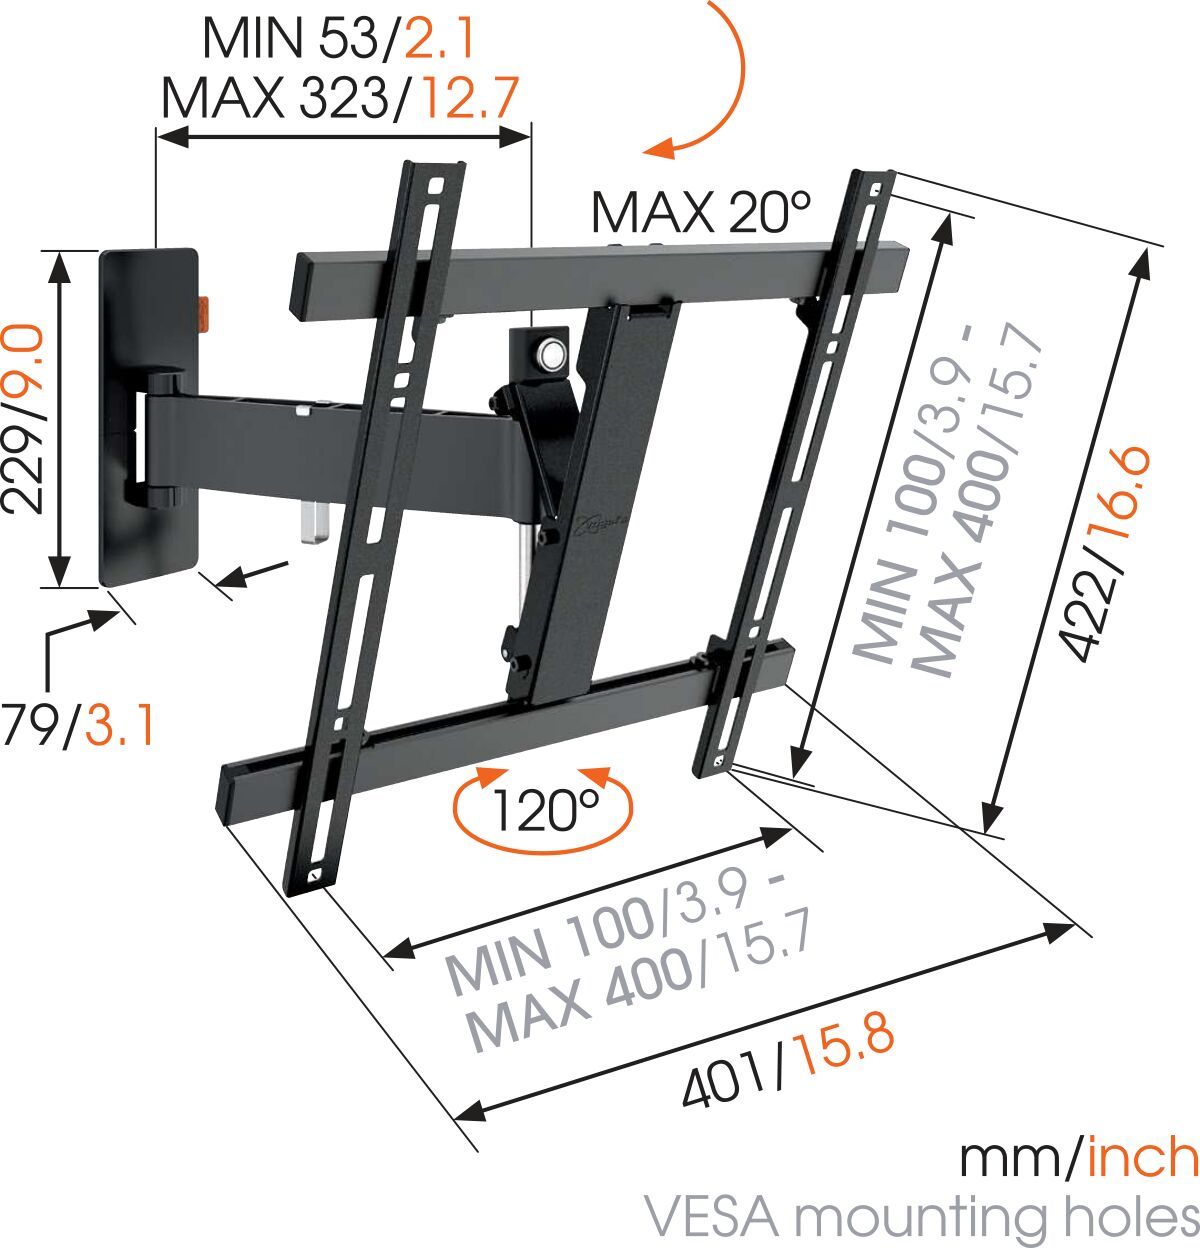 Vogel's WALL 2225 Full-Motion TV Wall Mount (black) - Suitable for 32 up to 55 inch TVs - Motion (up to 120°) - Tilt up to 20° - Dimensions